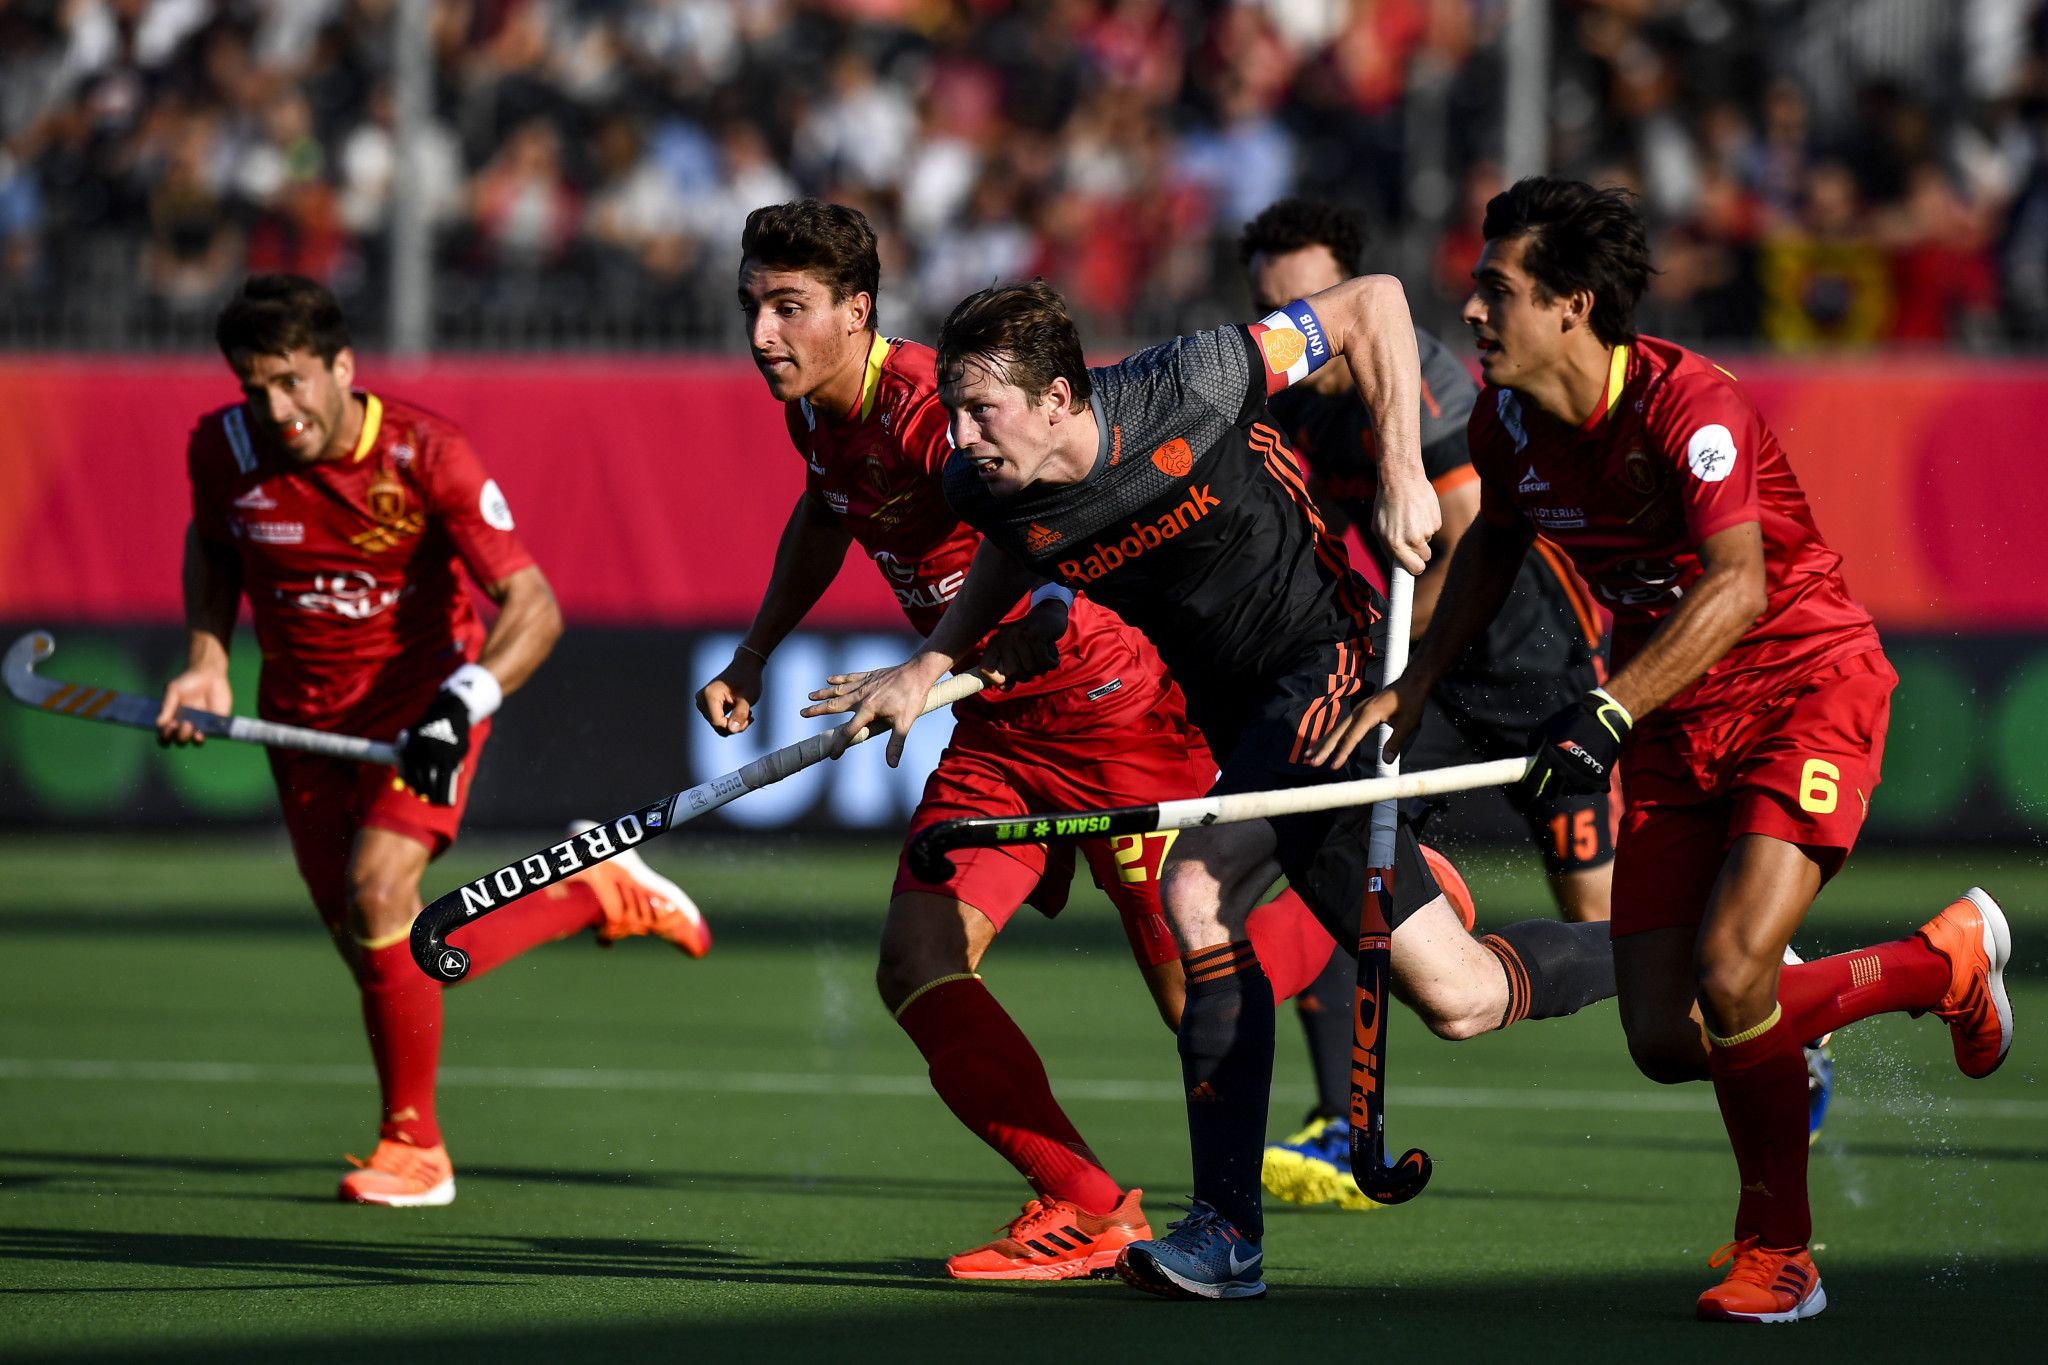 Spain stun The Netherlands to reach first EuroHockey Nations Championship final since 2007